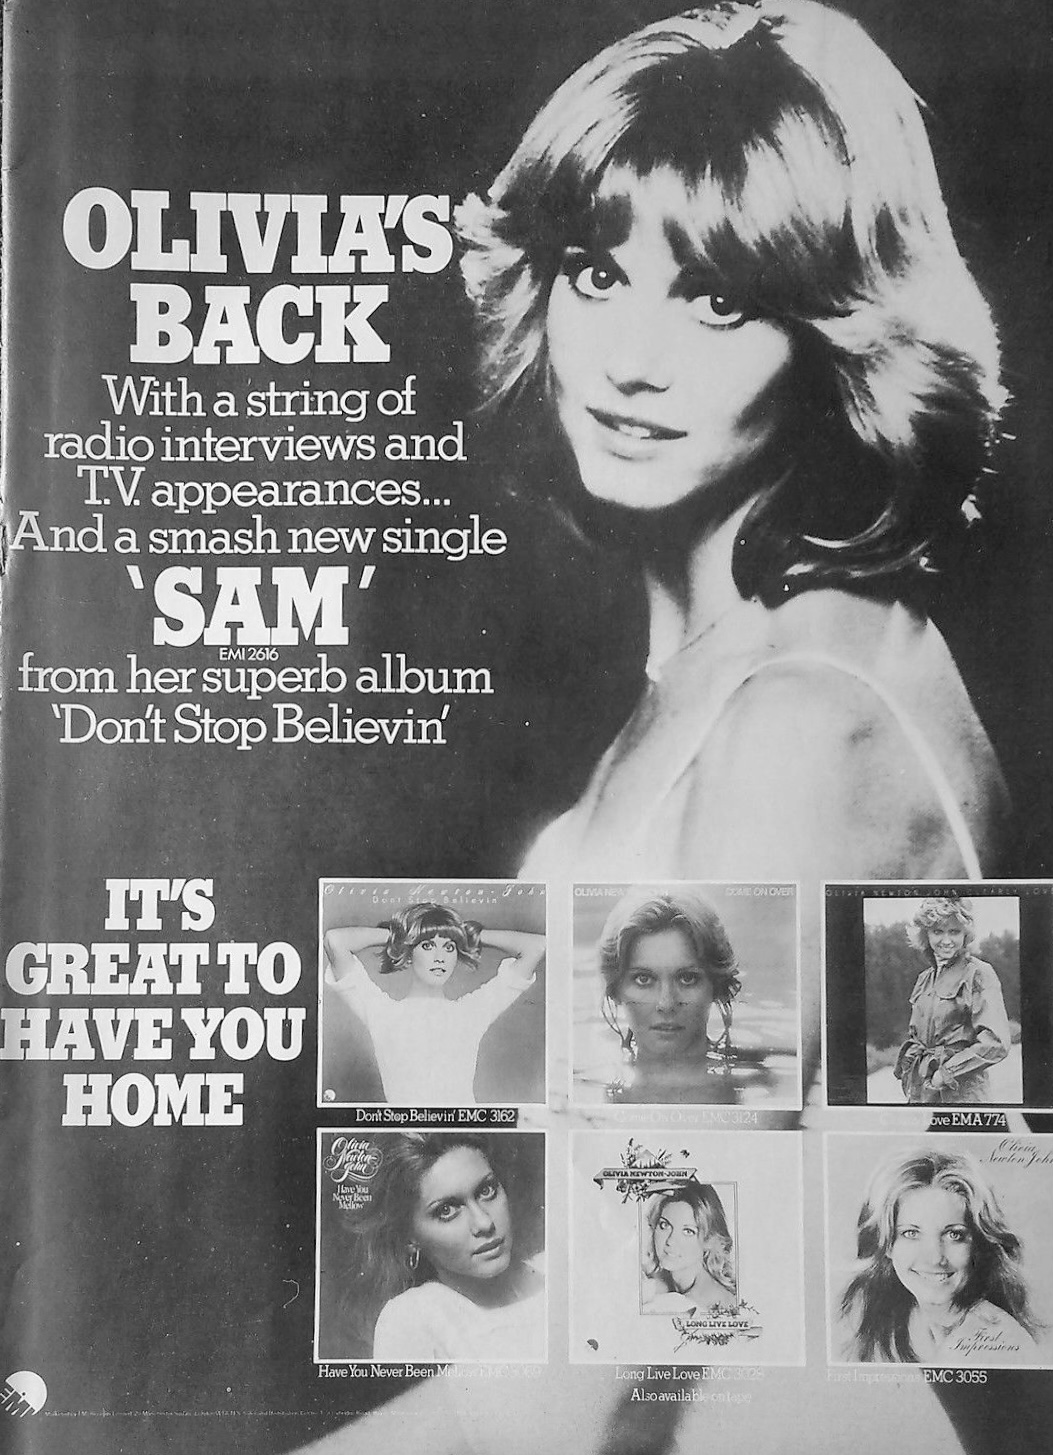 EMI Olivia's Back ad for the Don't Stop Believin album and trailing radio and TV publicity - Music Week